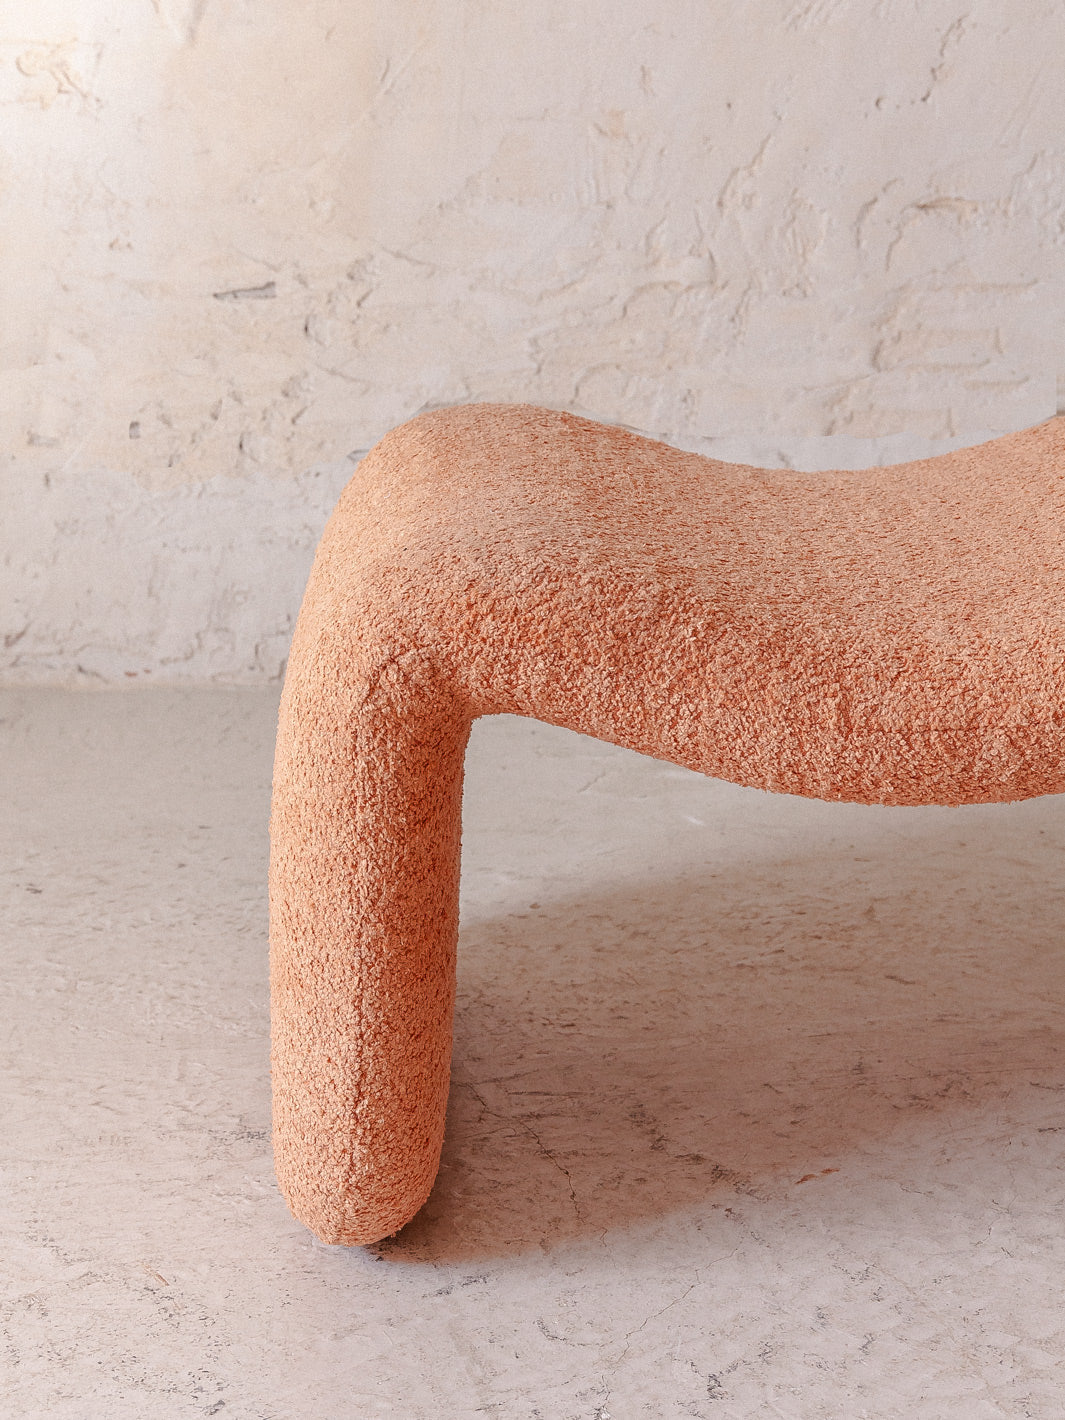 Olivier Mourgue nude pouf